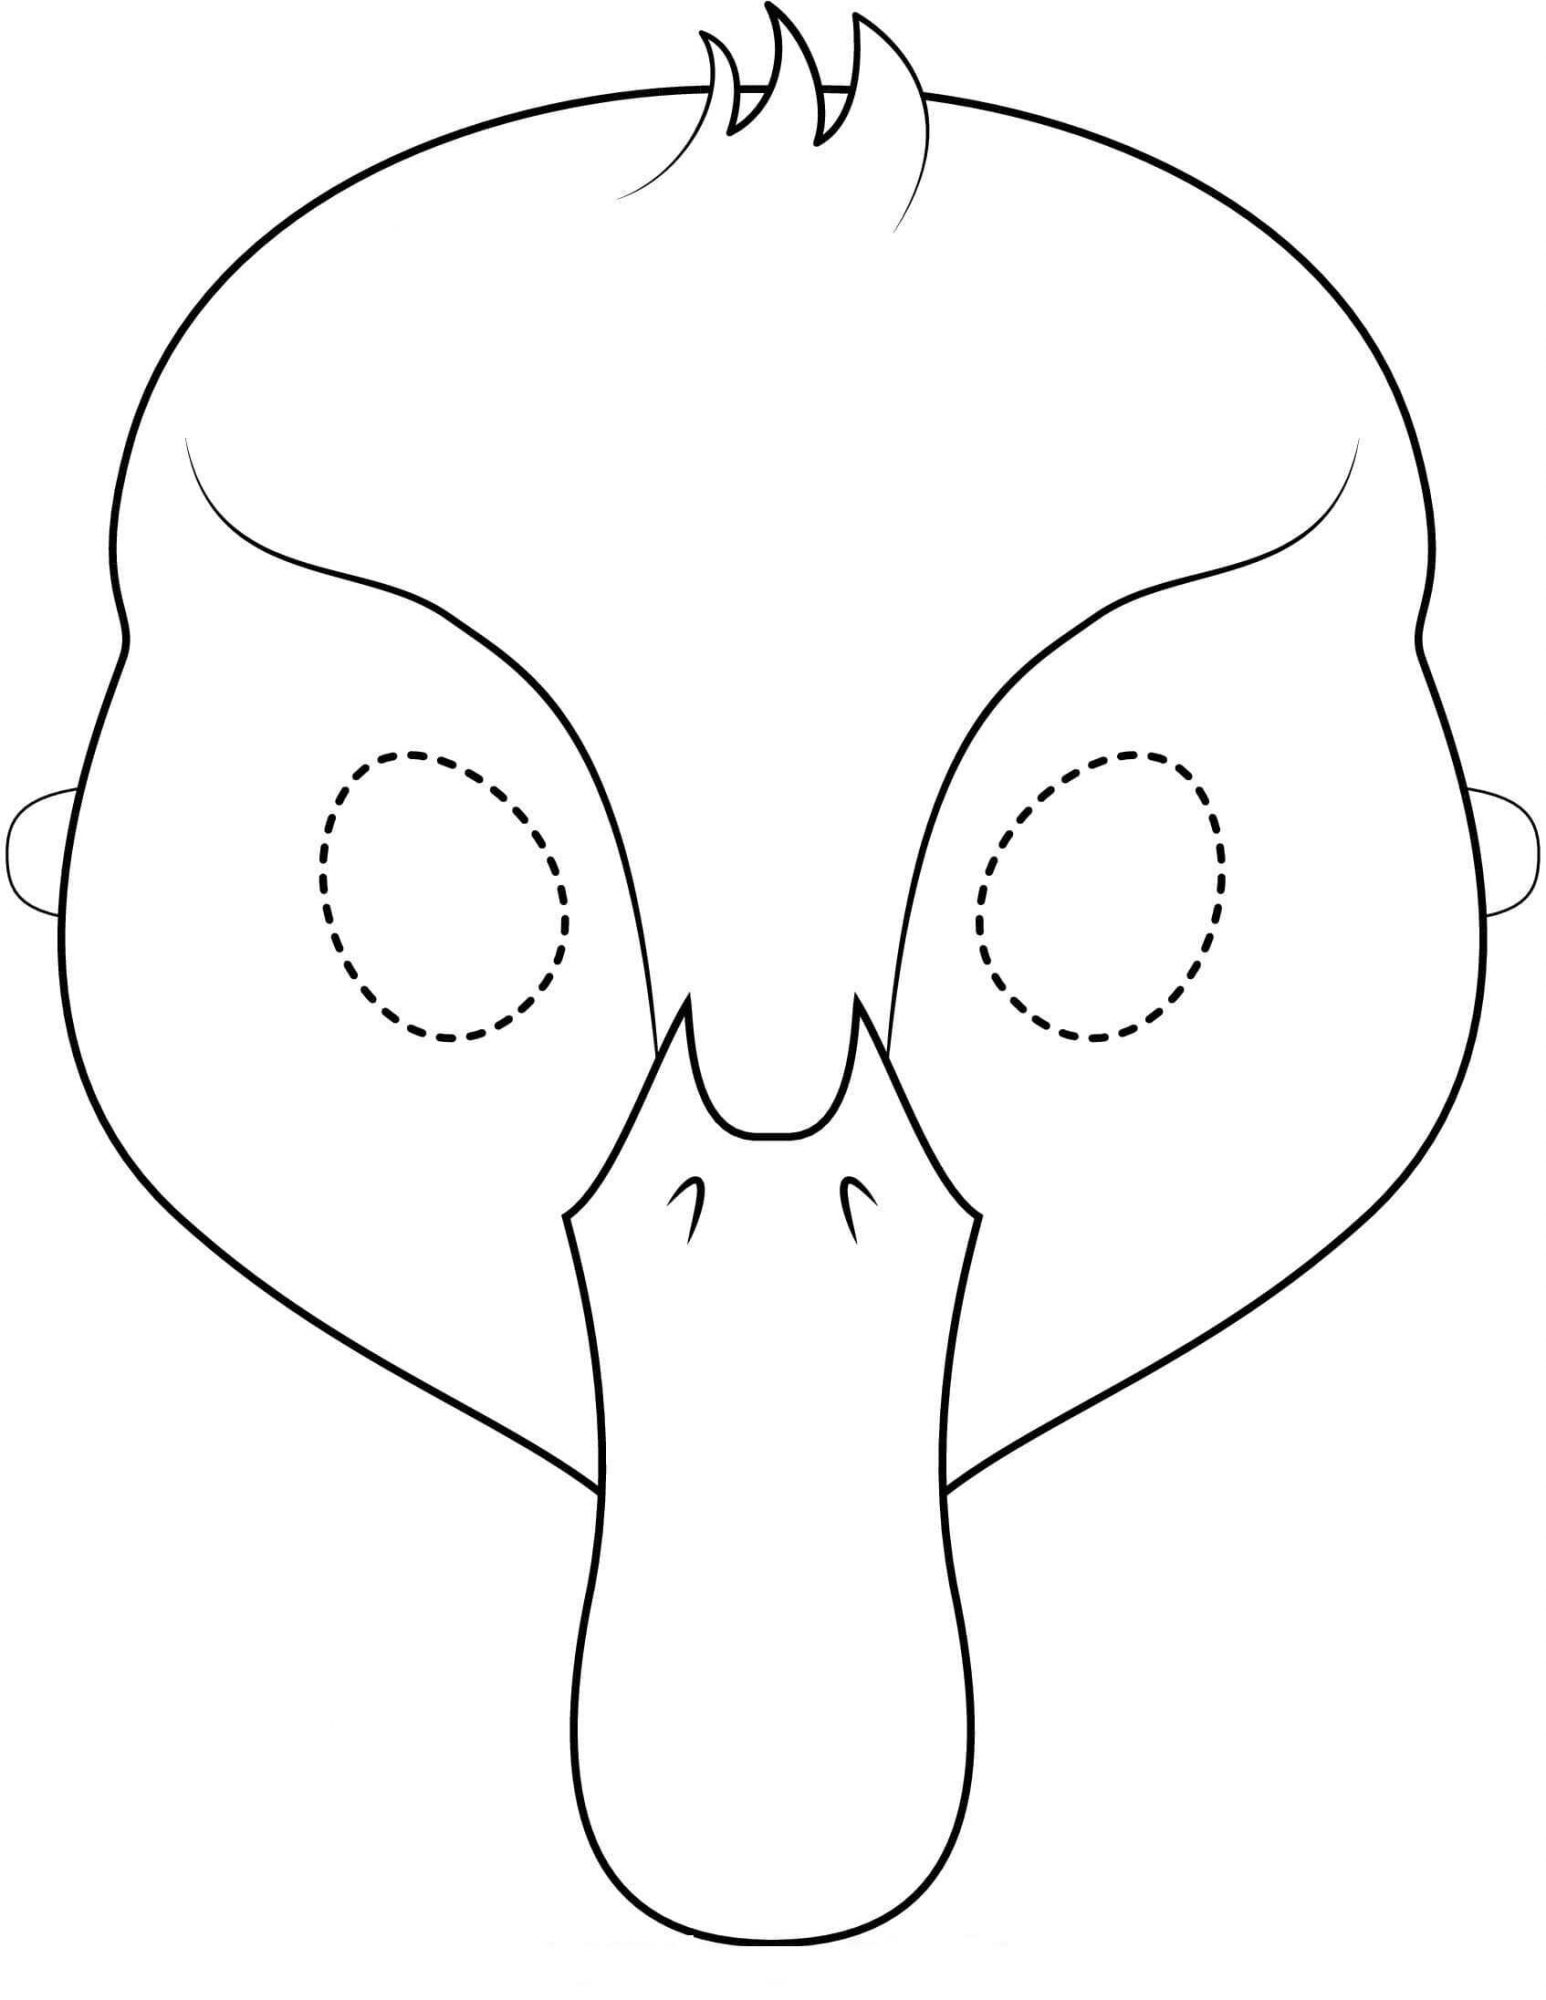 How to draw ugly duckling mask outline Coloring Page